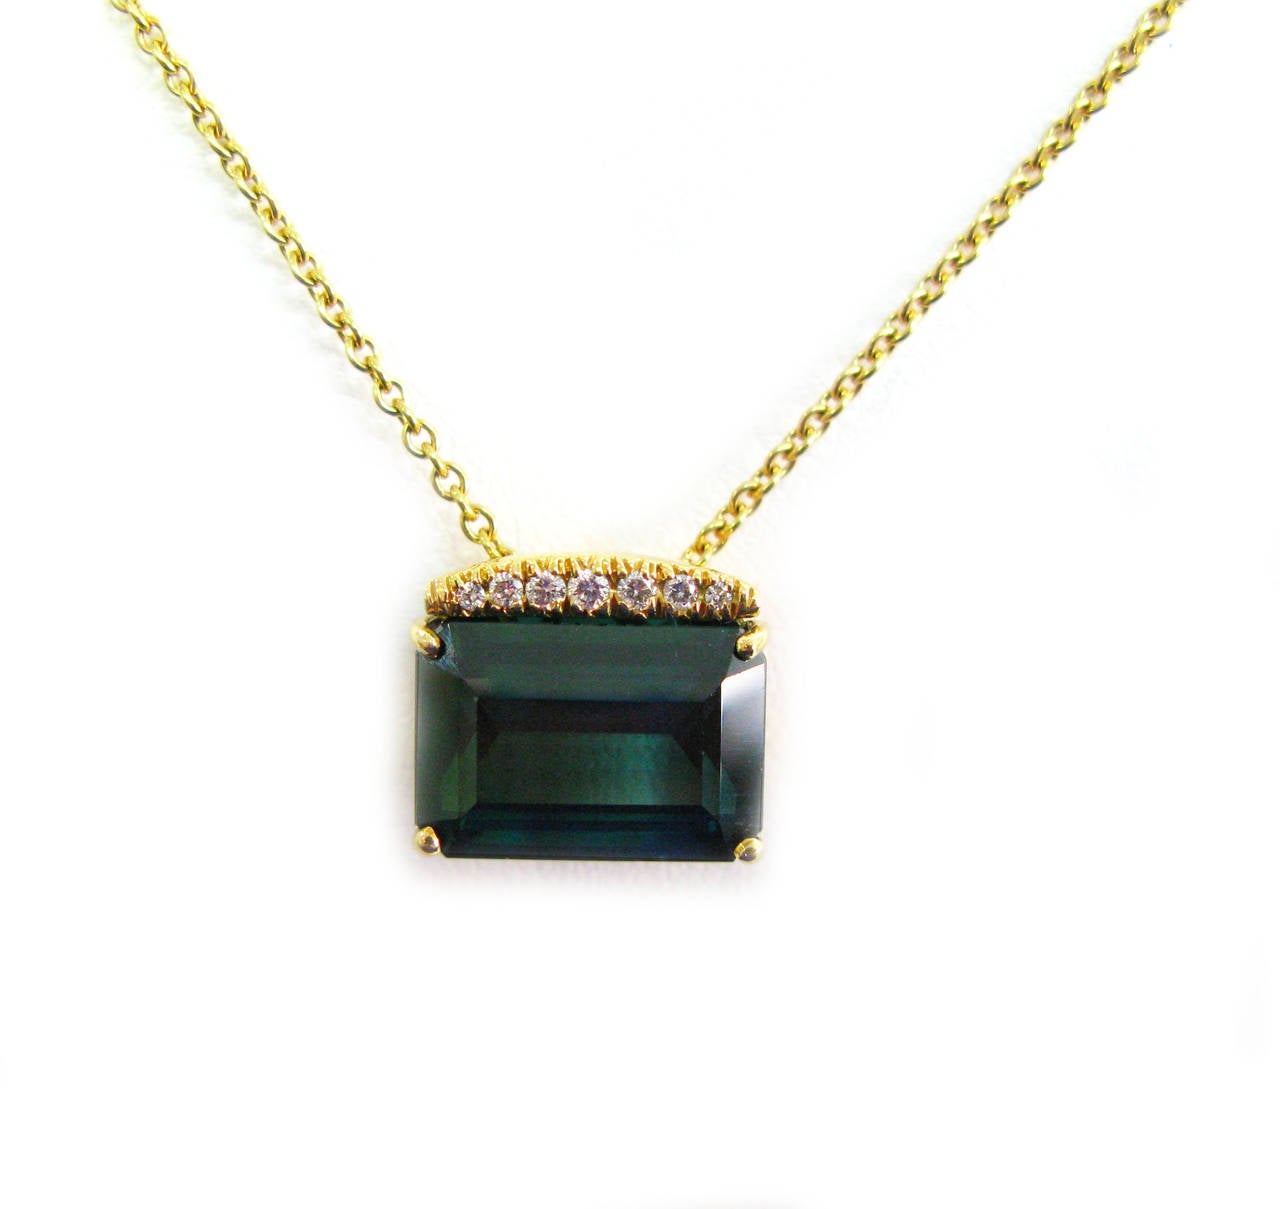 This beautiful 18kt yellow gold Kurt Wayne signed pendant features a stunning deep bluish green step cut tourmaline weighing 7.22cts with a row of 7 graduating prong-set round brilliant diamonds totaling 0.08cts suspended from a 16